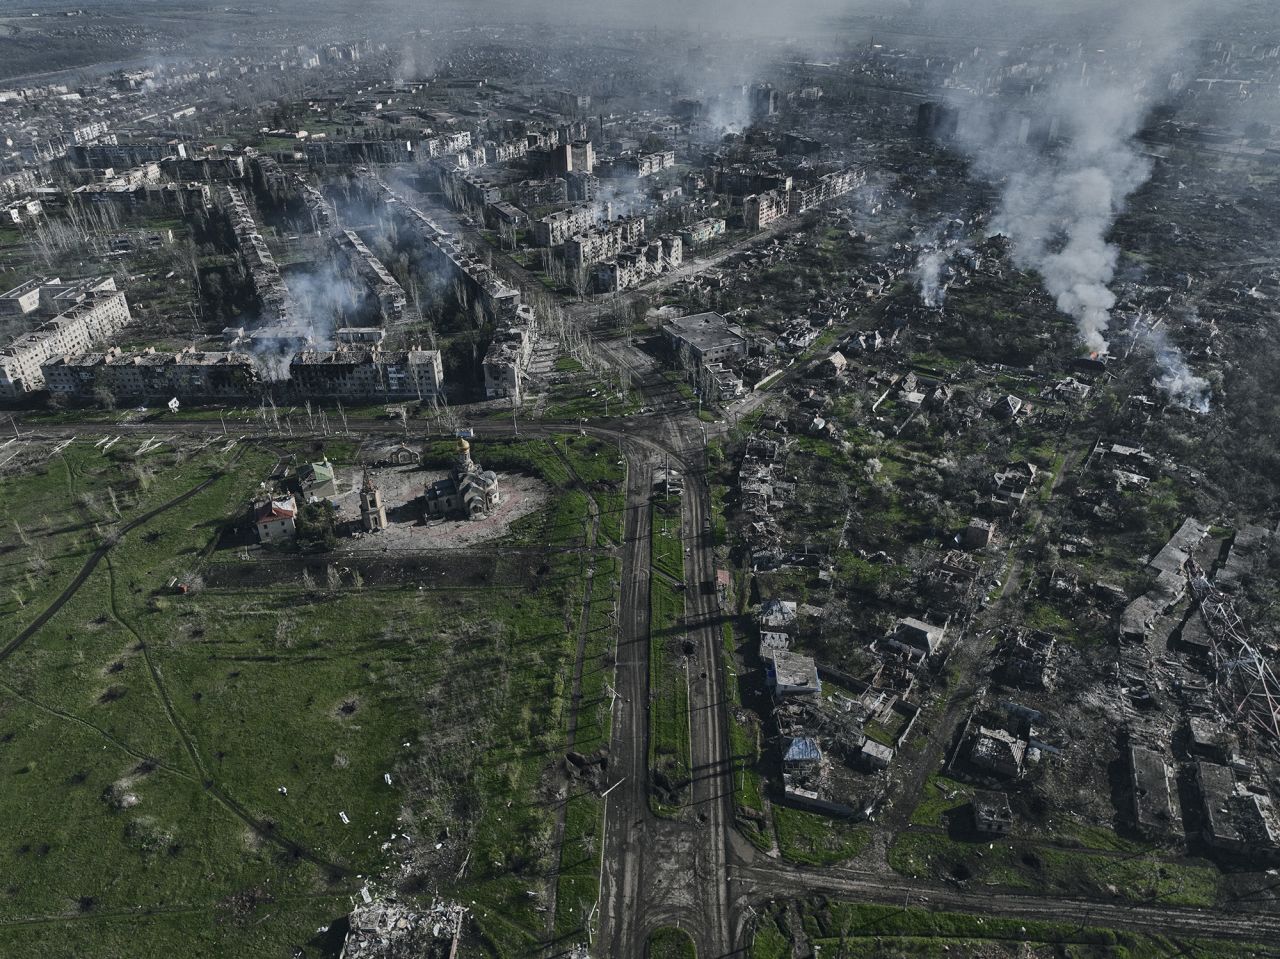 Smoke rises from buildings in this aerial view of Bakhmut in the Donetsk region, Ukraine, on April 26.